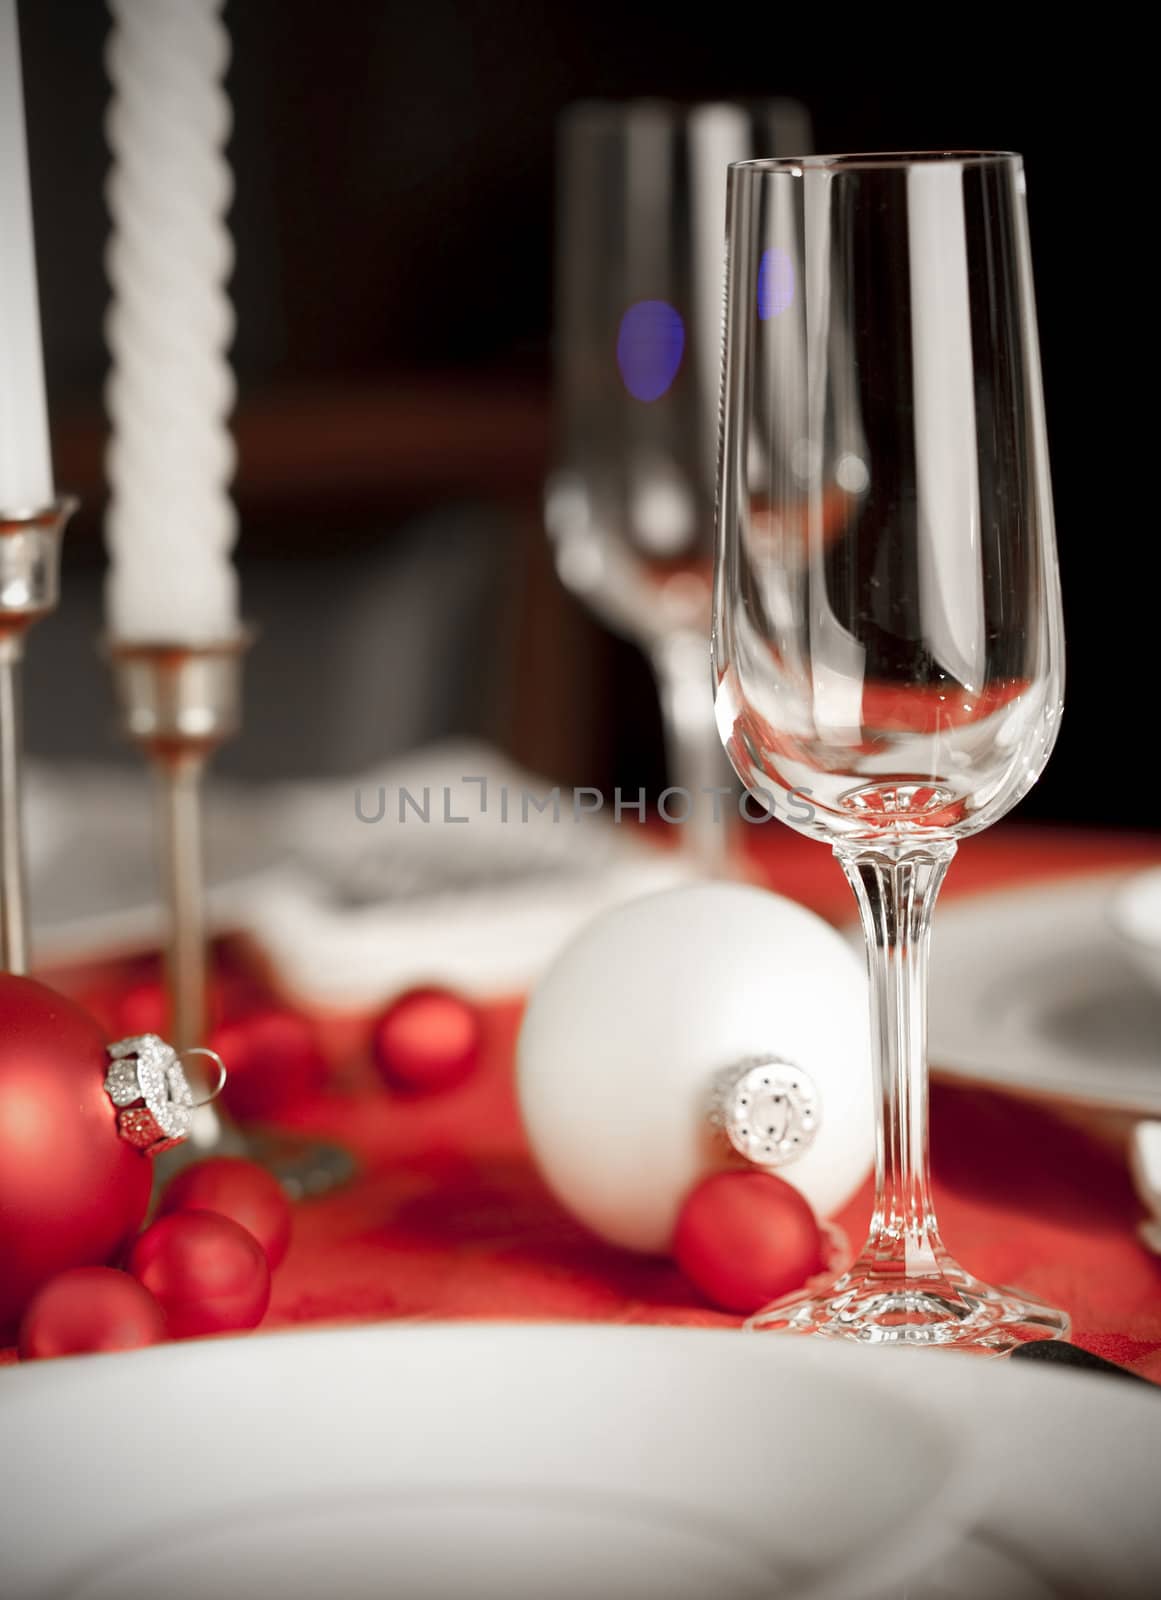 Christmas table setting in red and white by jarenwicklund